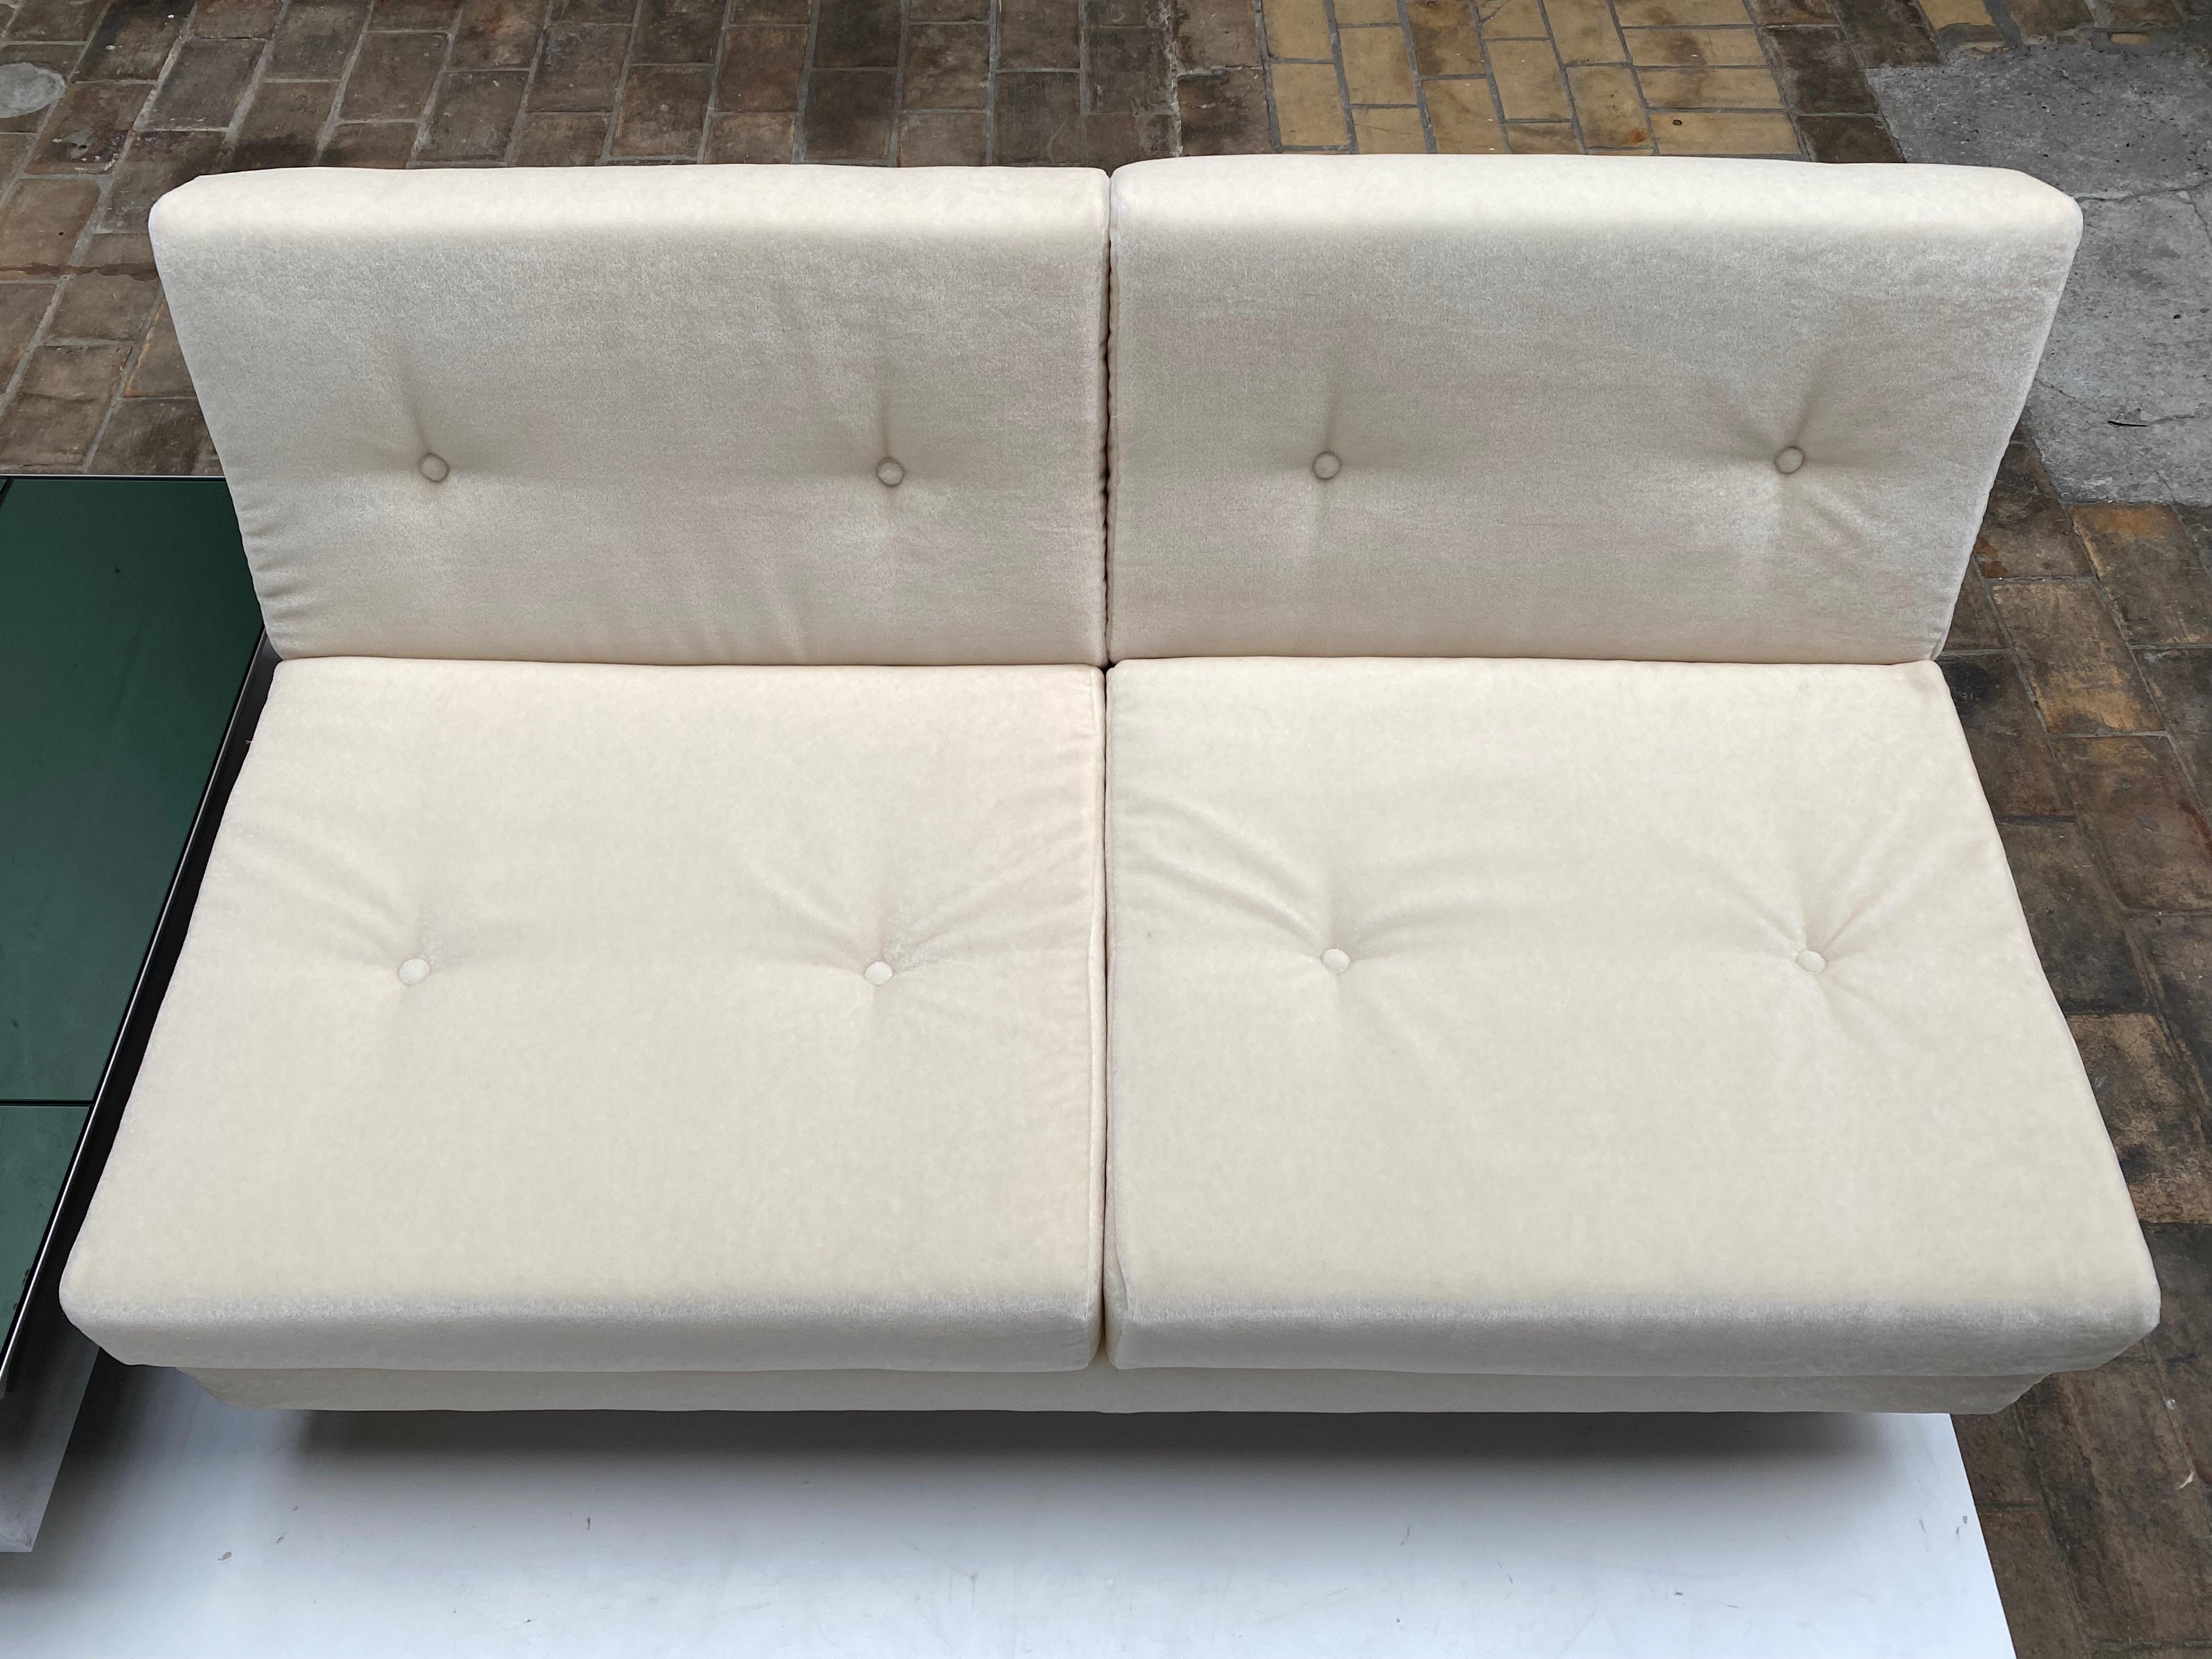 Pair of Two Seat Mohair 'California' Sofas, Jacques Charpentier, Paris, 1970 For Sale 10